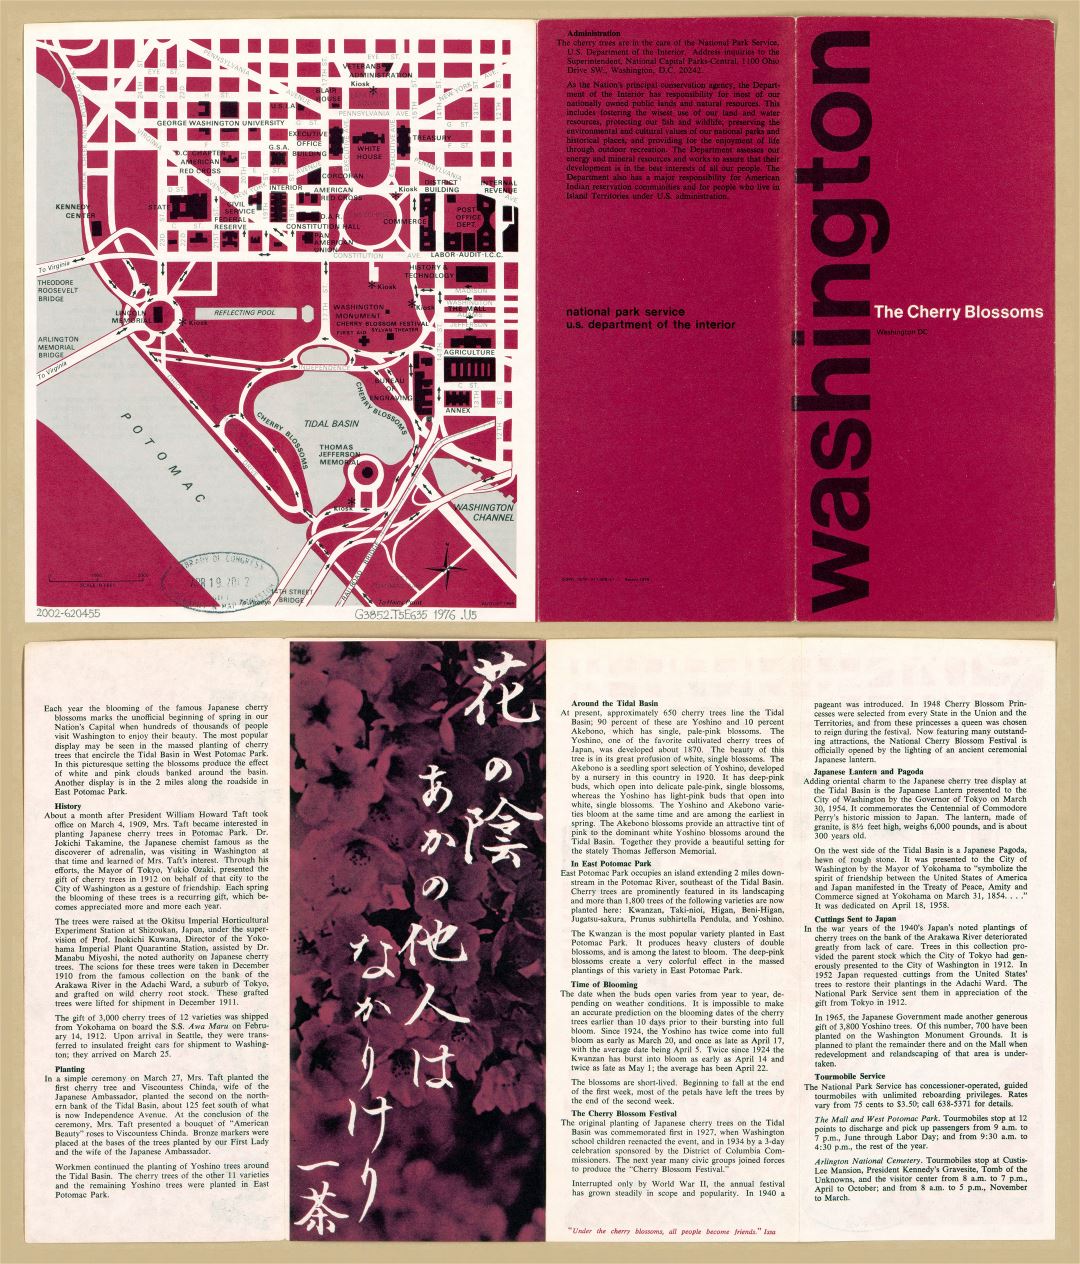 Large scale map of Washington the Cherry Blossoms - 1976